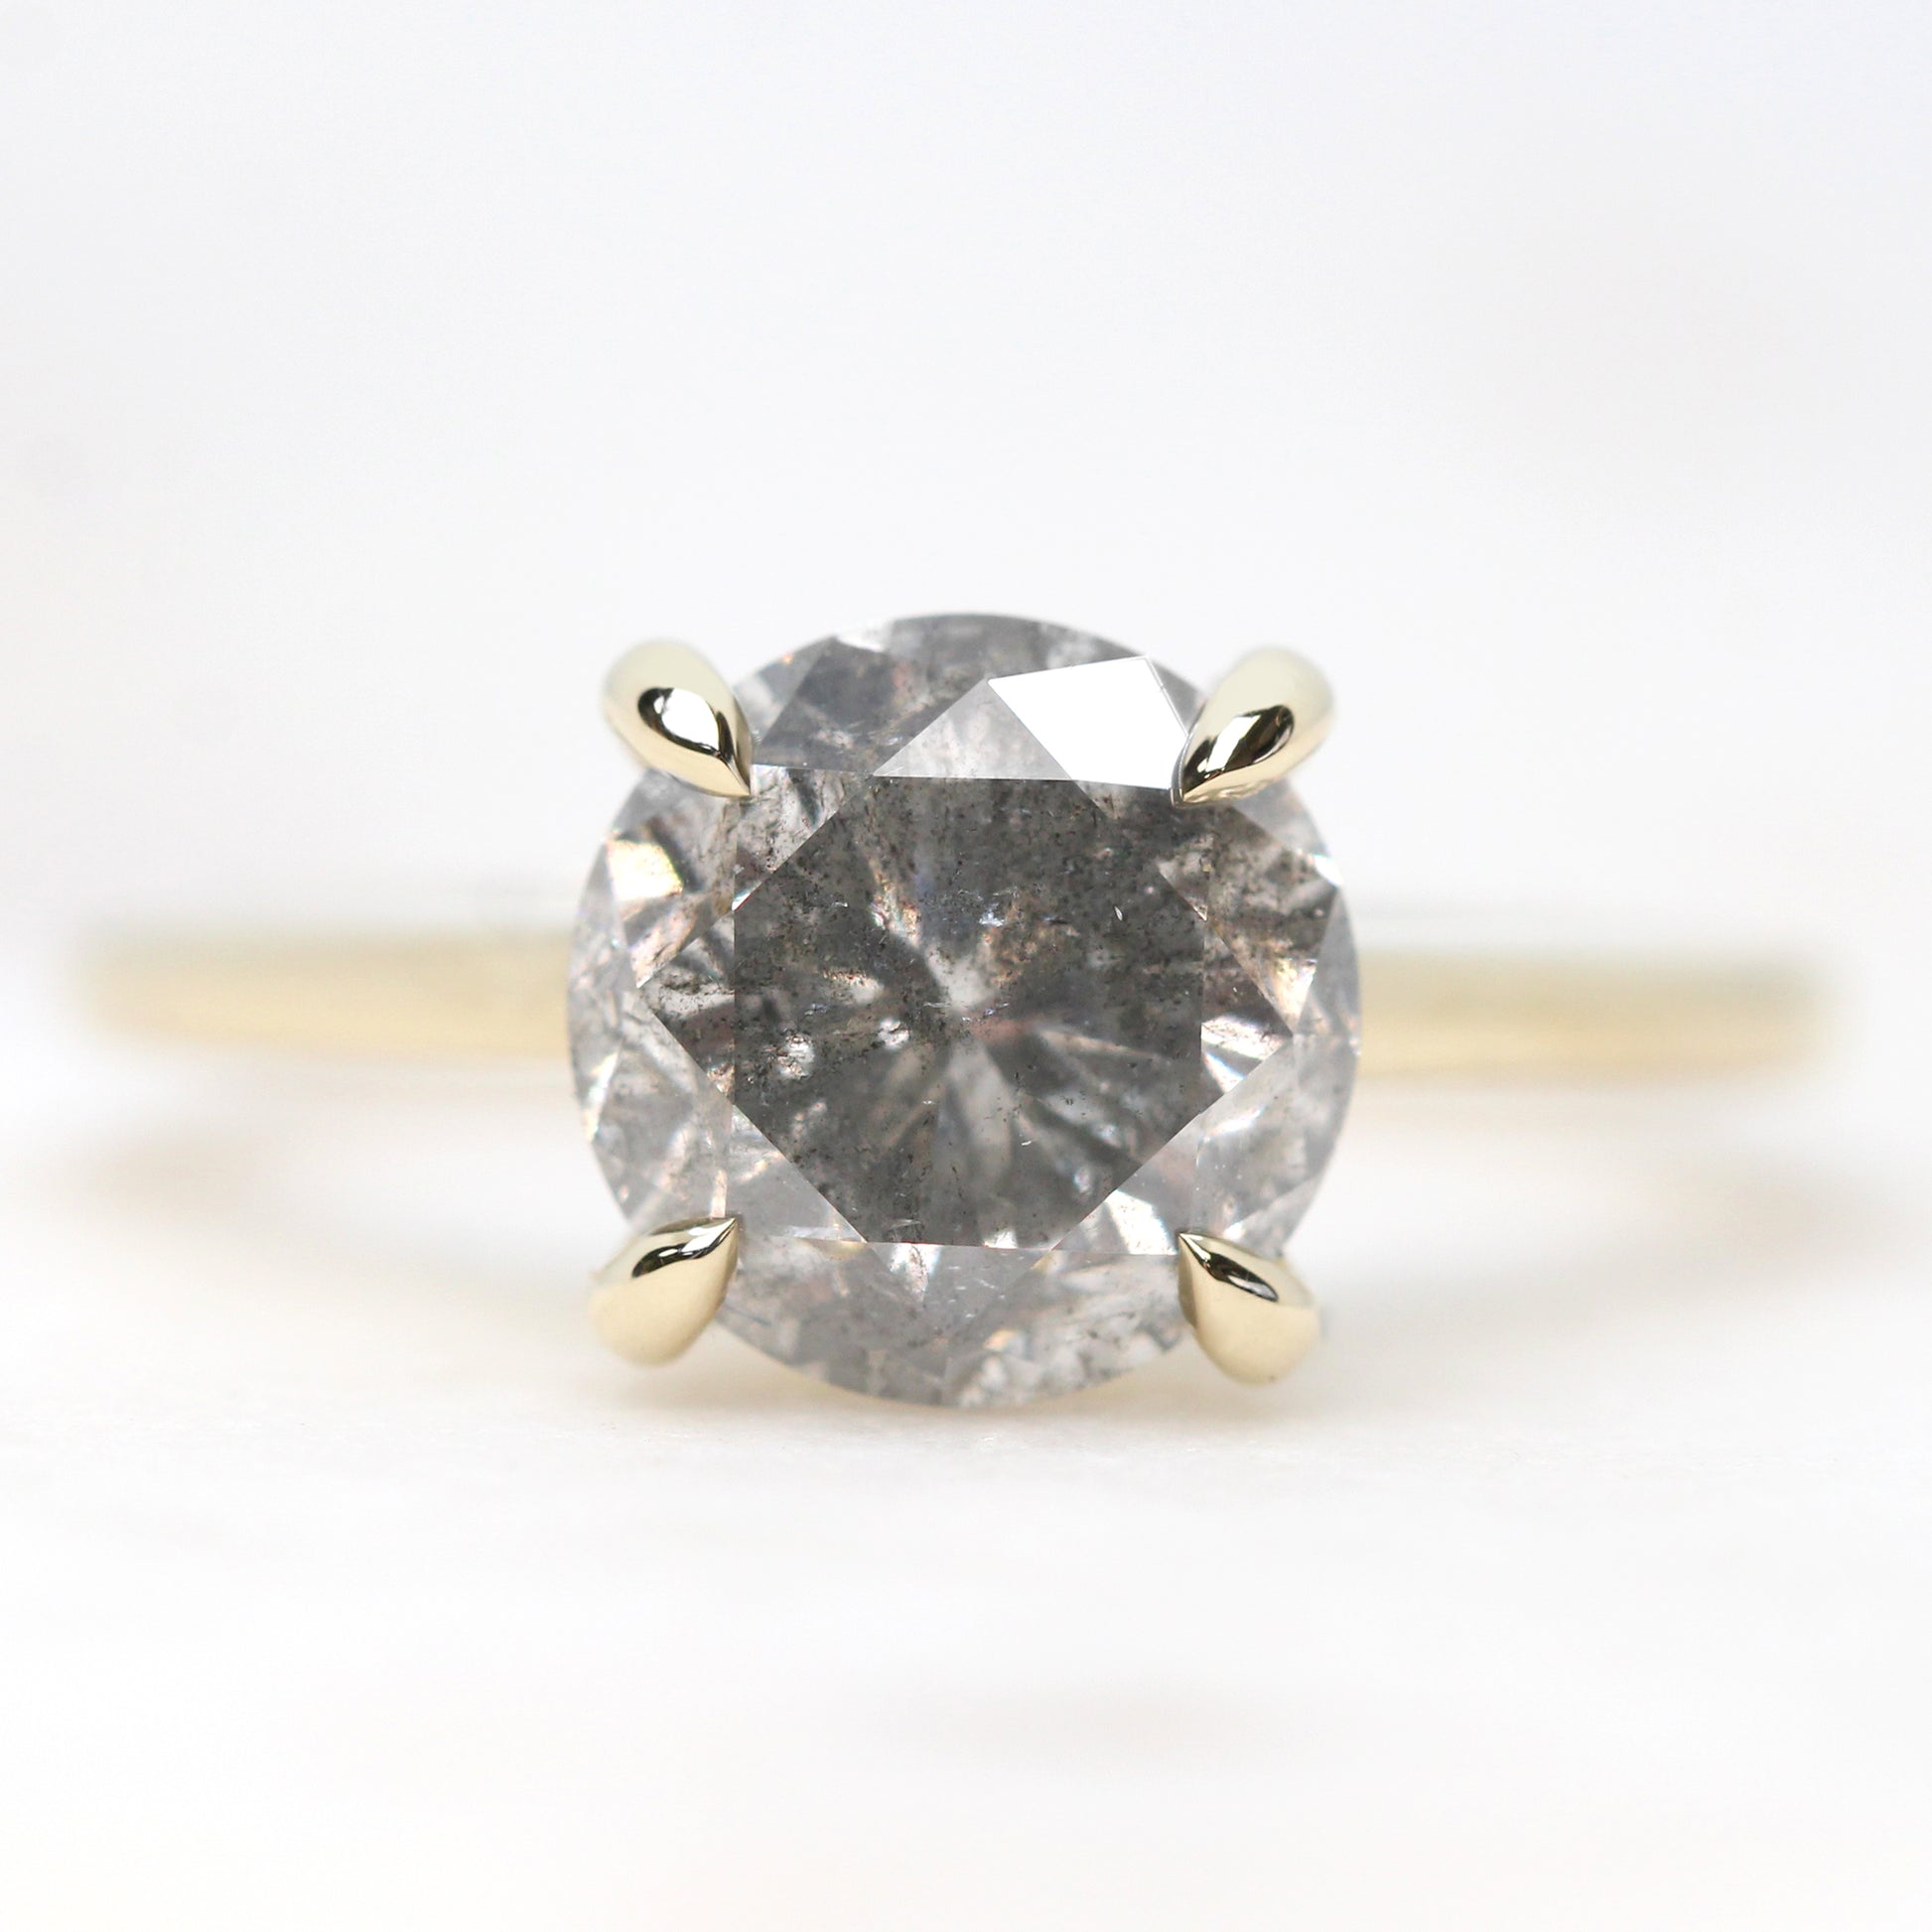 Elle Ring with a 2.68 Carat Round Bright Gray Salt and Pepper Diamond in 14k Yellow Gold - Ready to Size and Ship - Midwinter Co. Alternative Bridal Rings and Modern Fine Jewelry